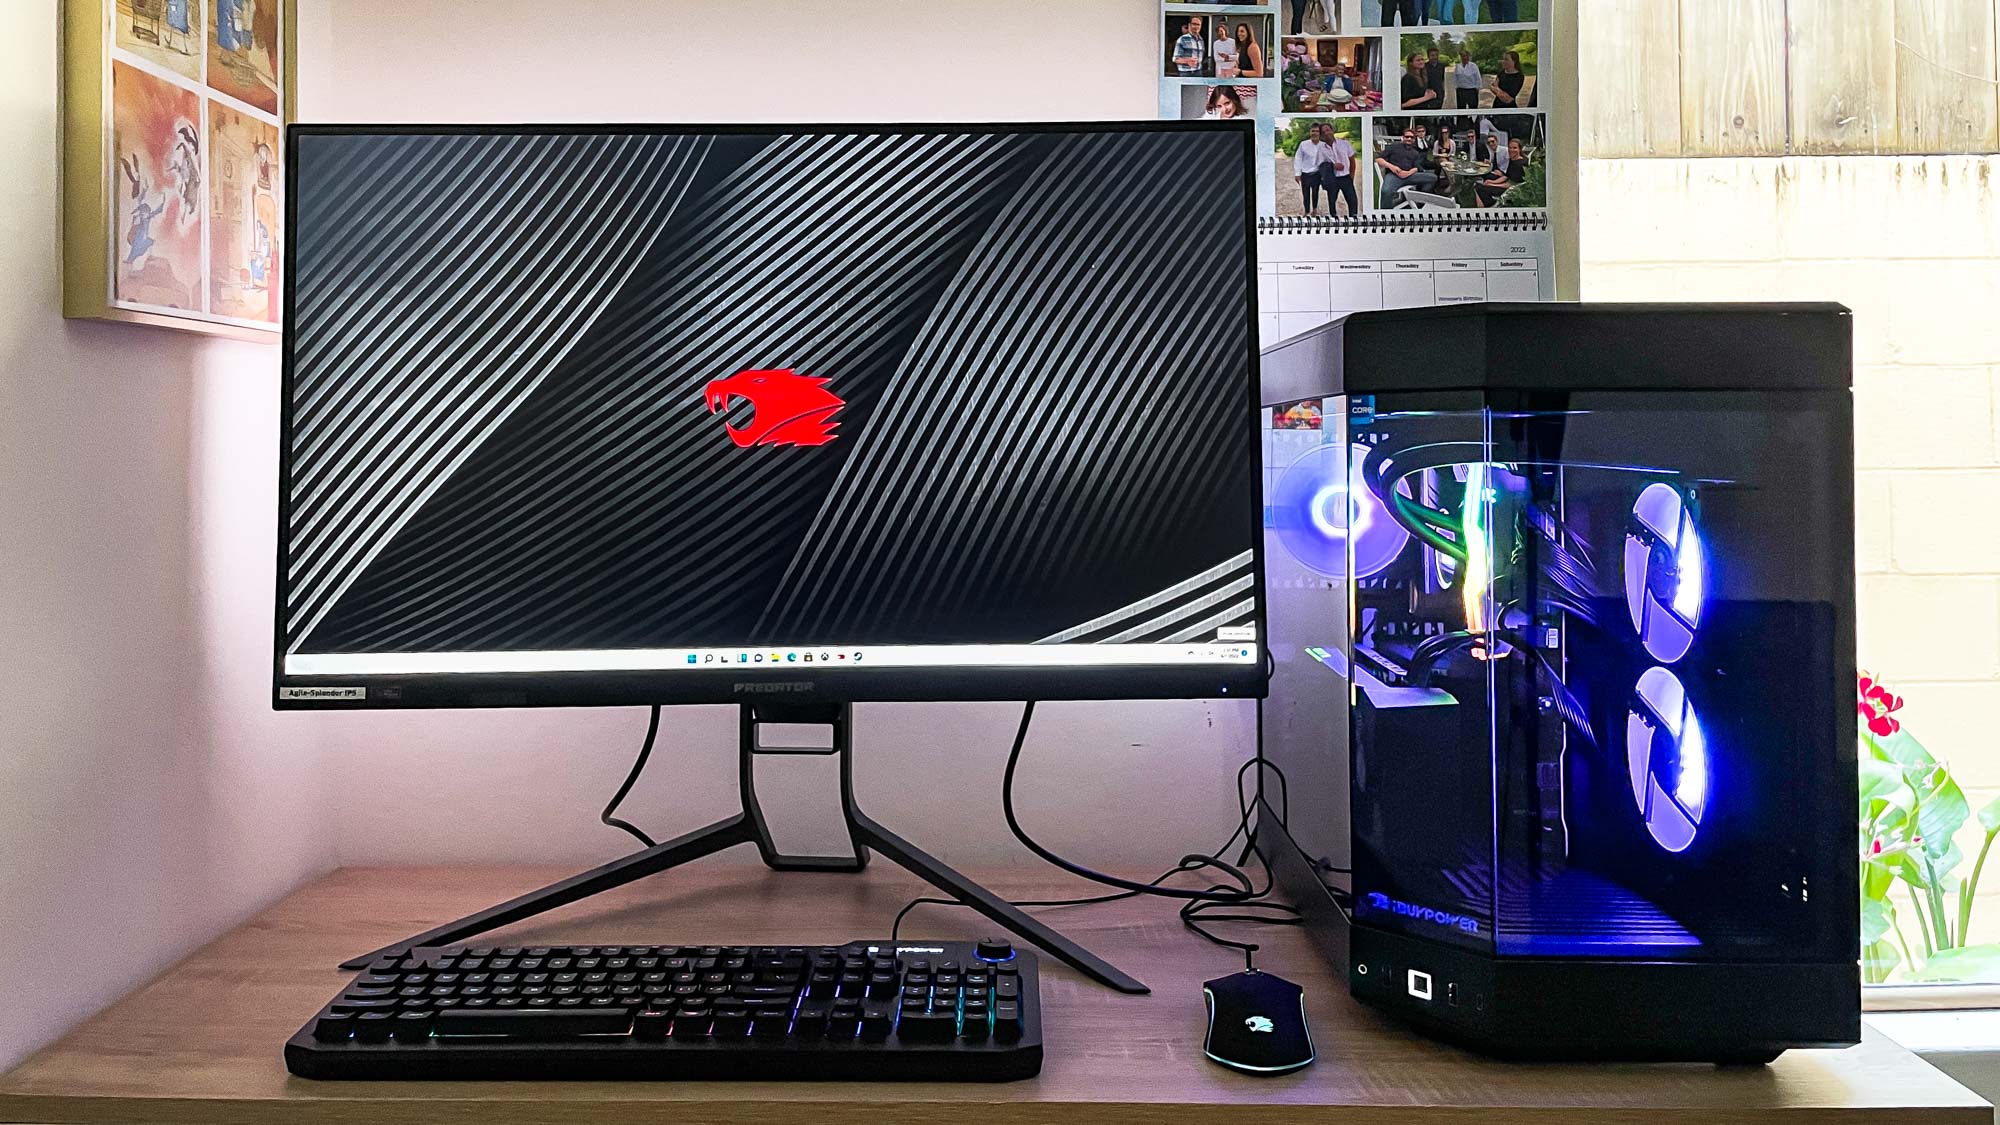 Paying monthly w/Affirm for my dream editing/gaming PC! What do you think?  : r/iBUYPOWER